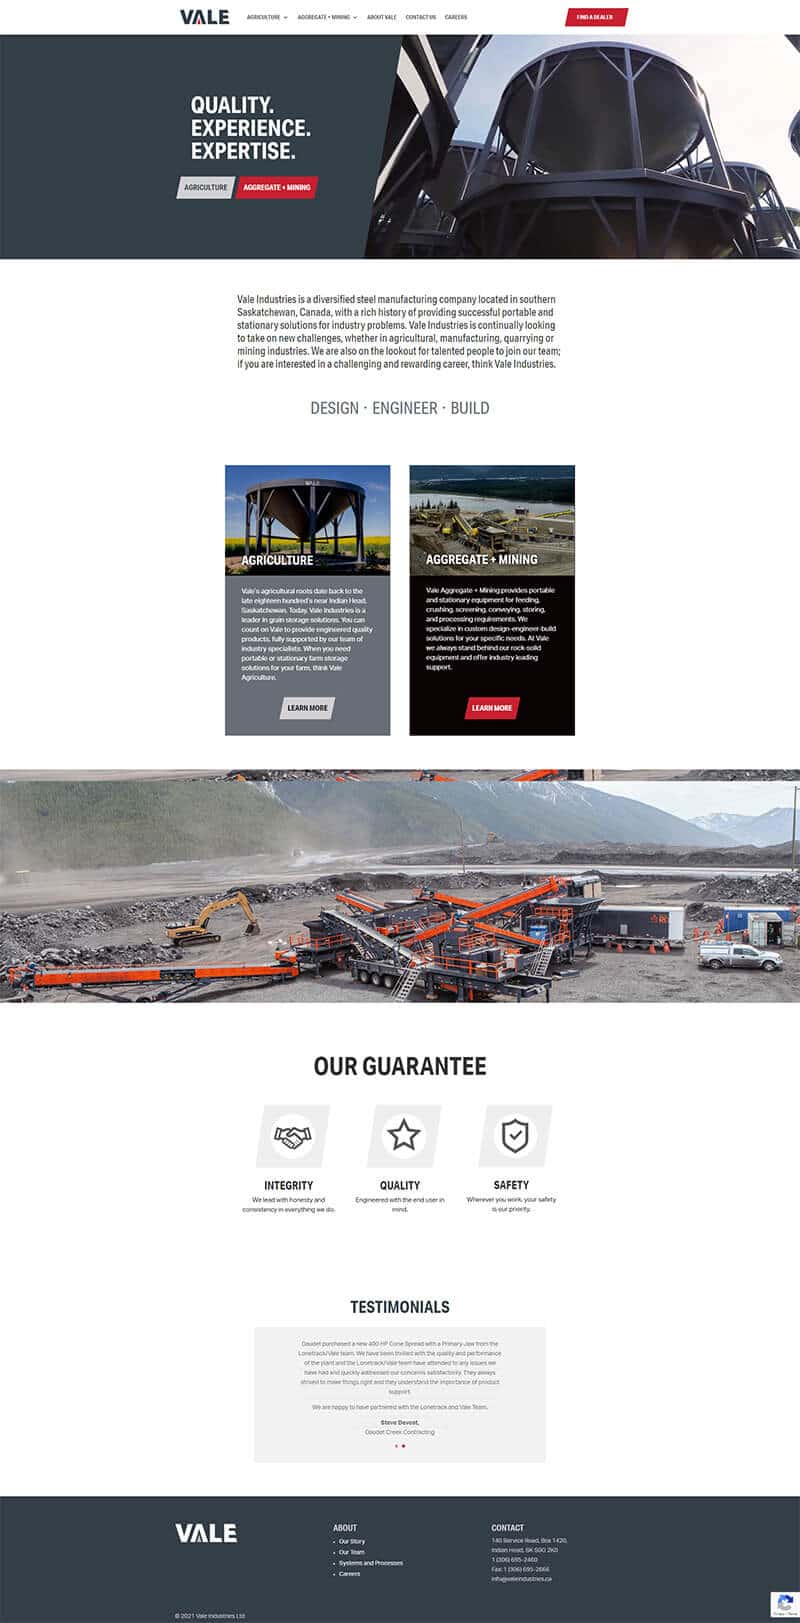 Vale-Industries-Agriculture-Aggregate-and-Mining-Equipment-Manufacturer